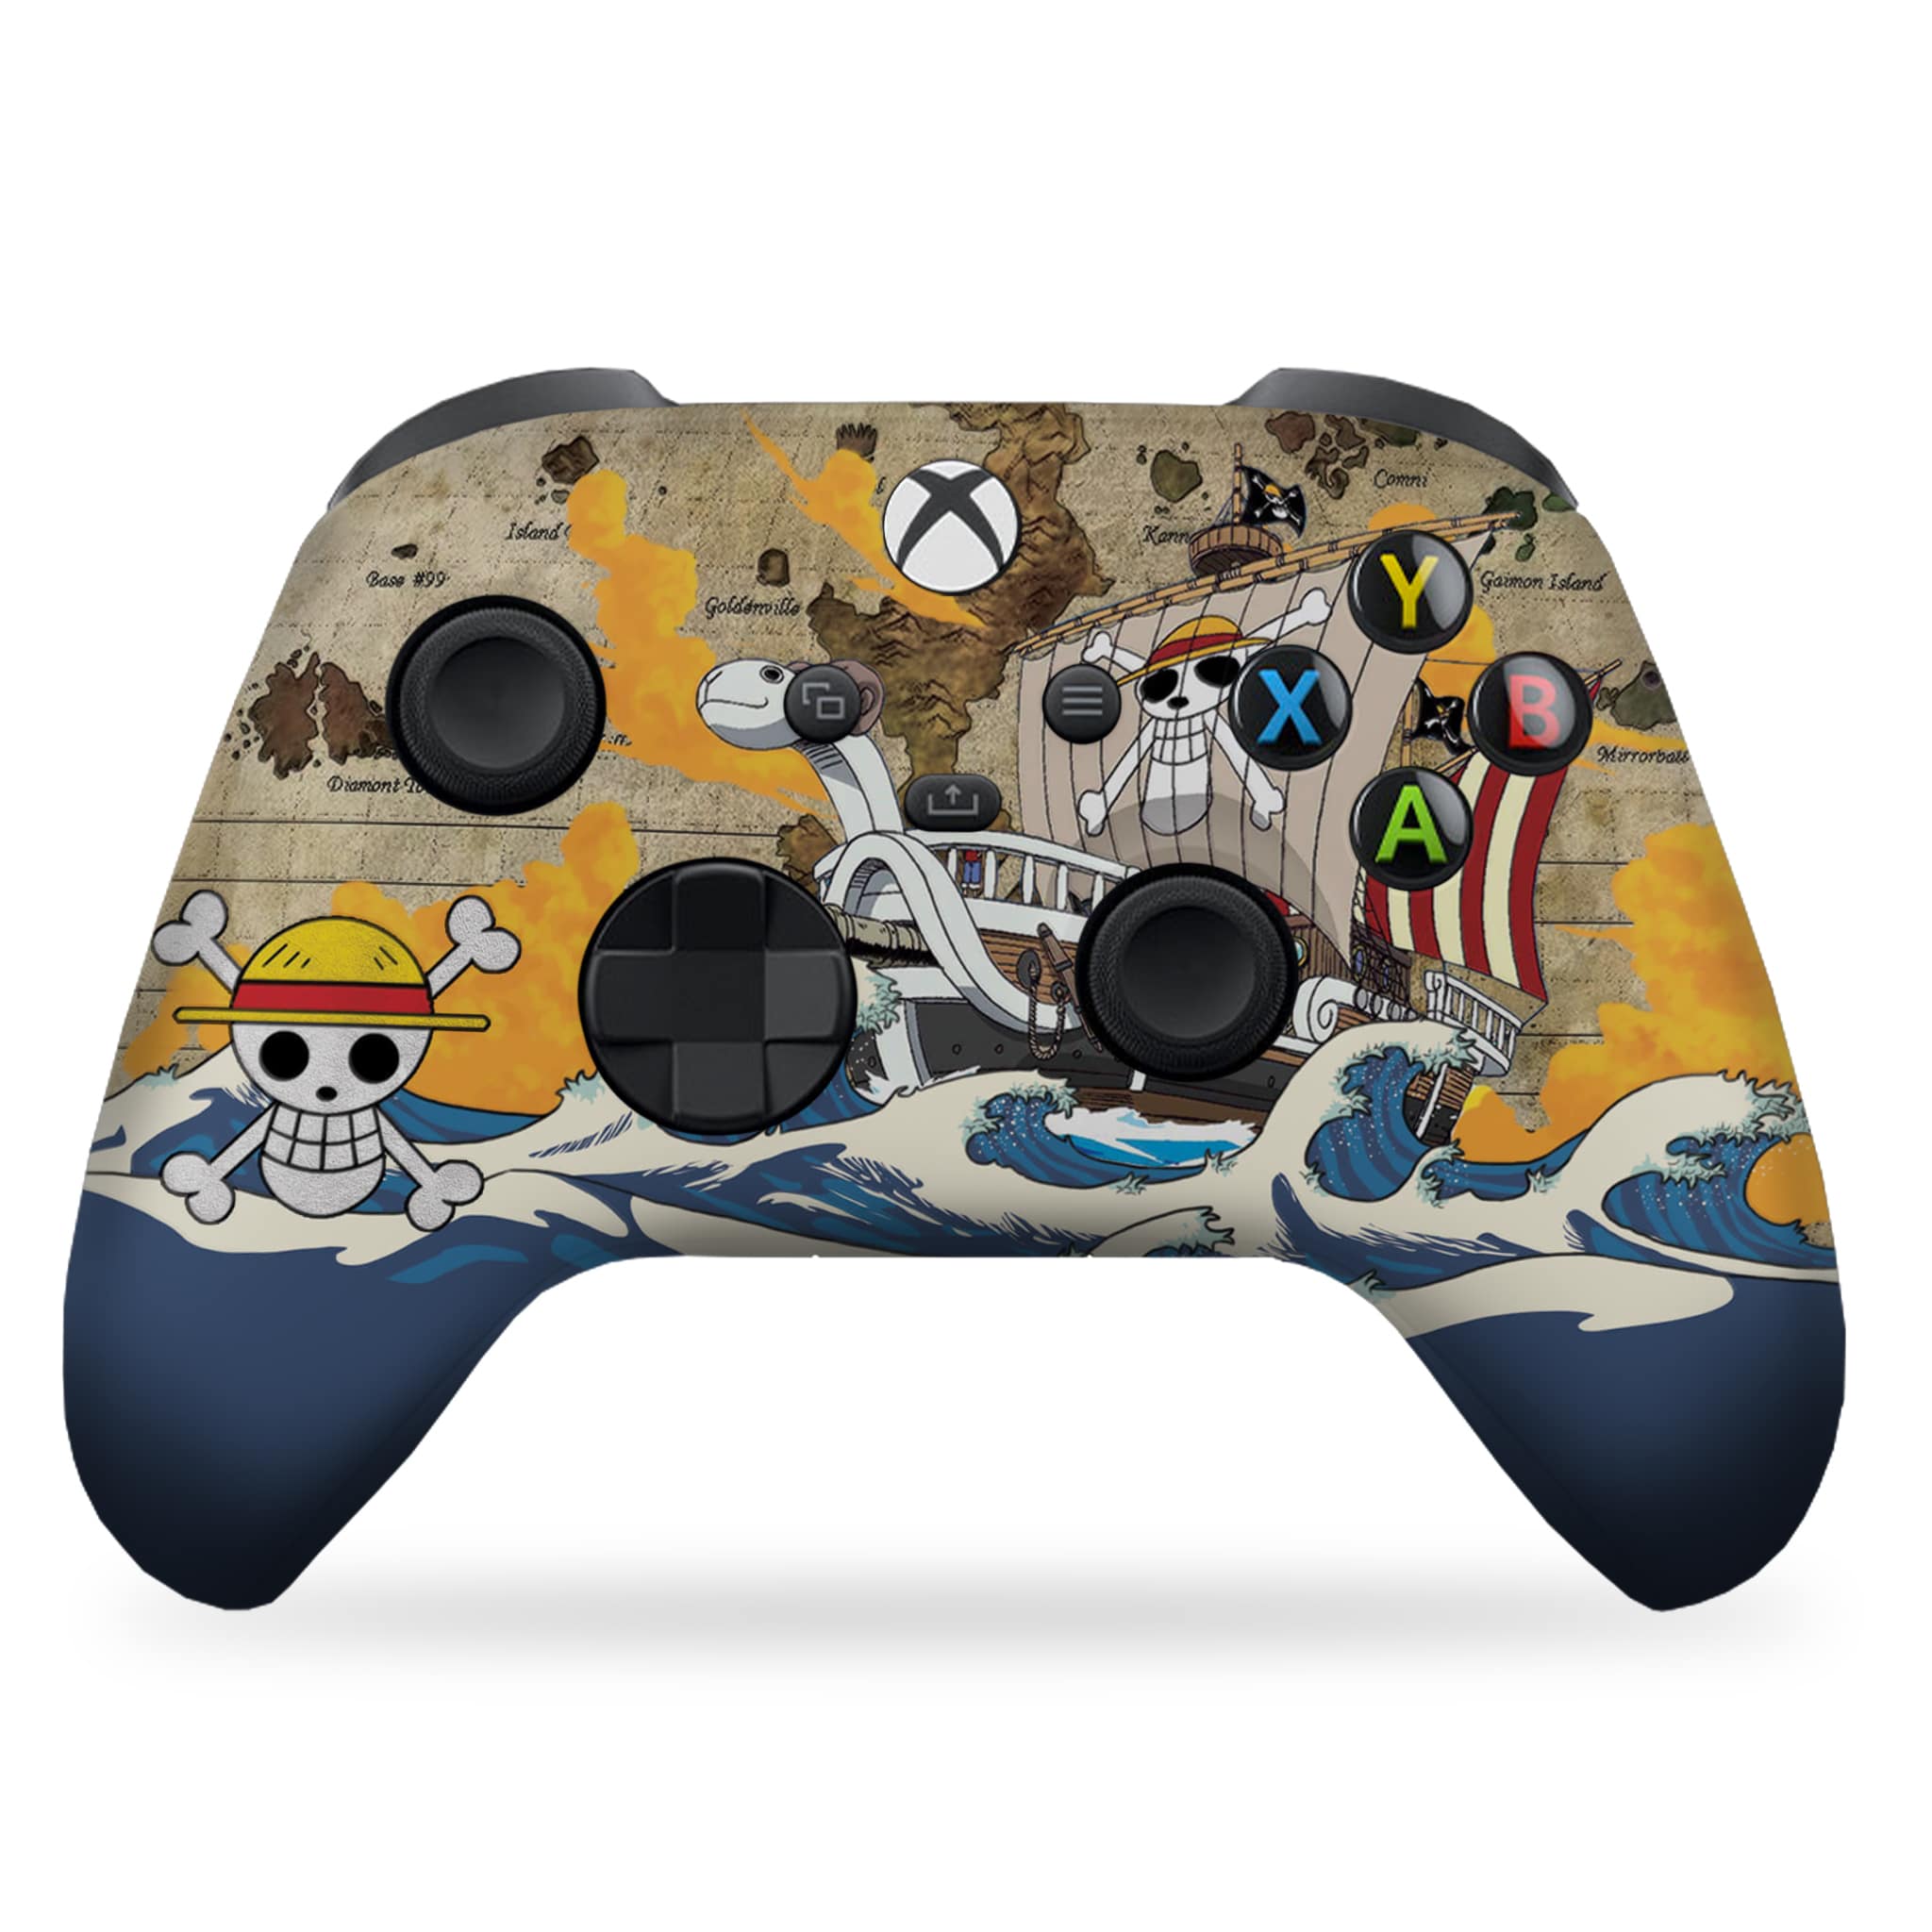 GamePad - Remote Play PS4 xbox by AAA Anime, INC